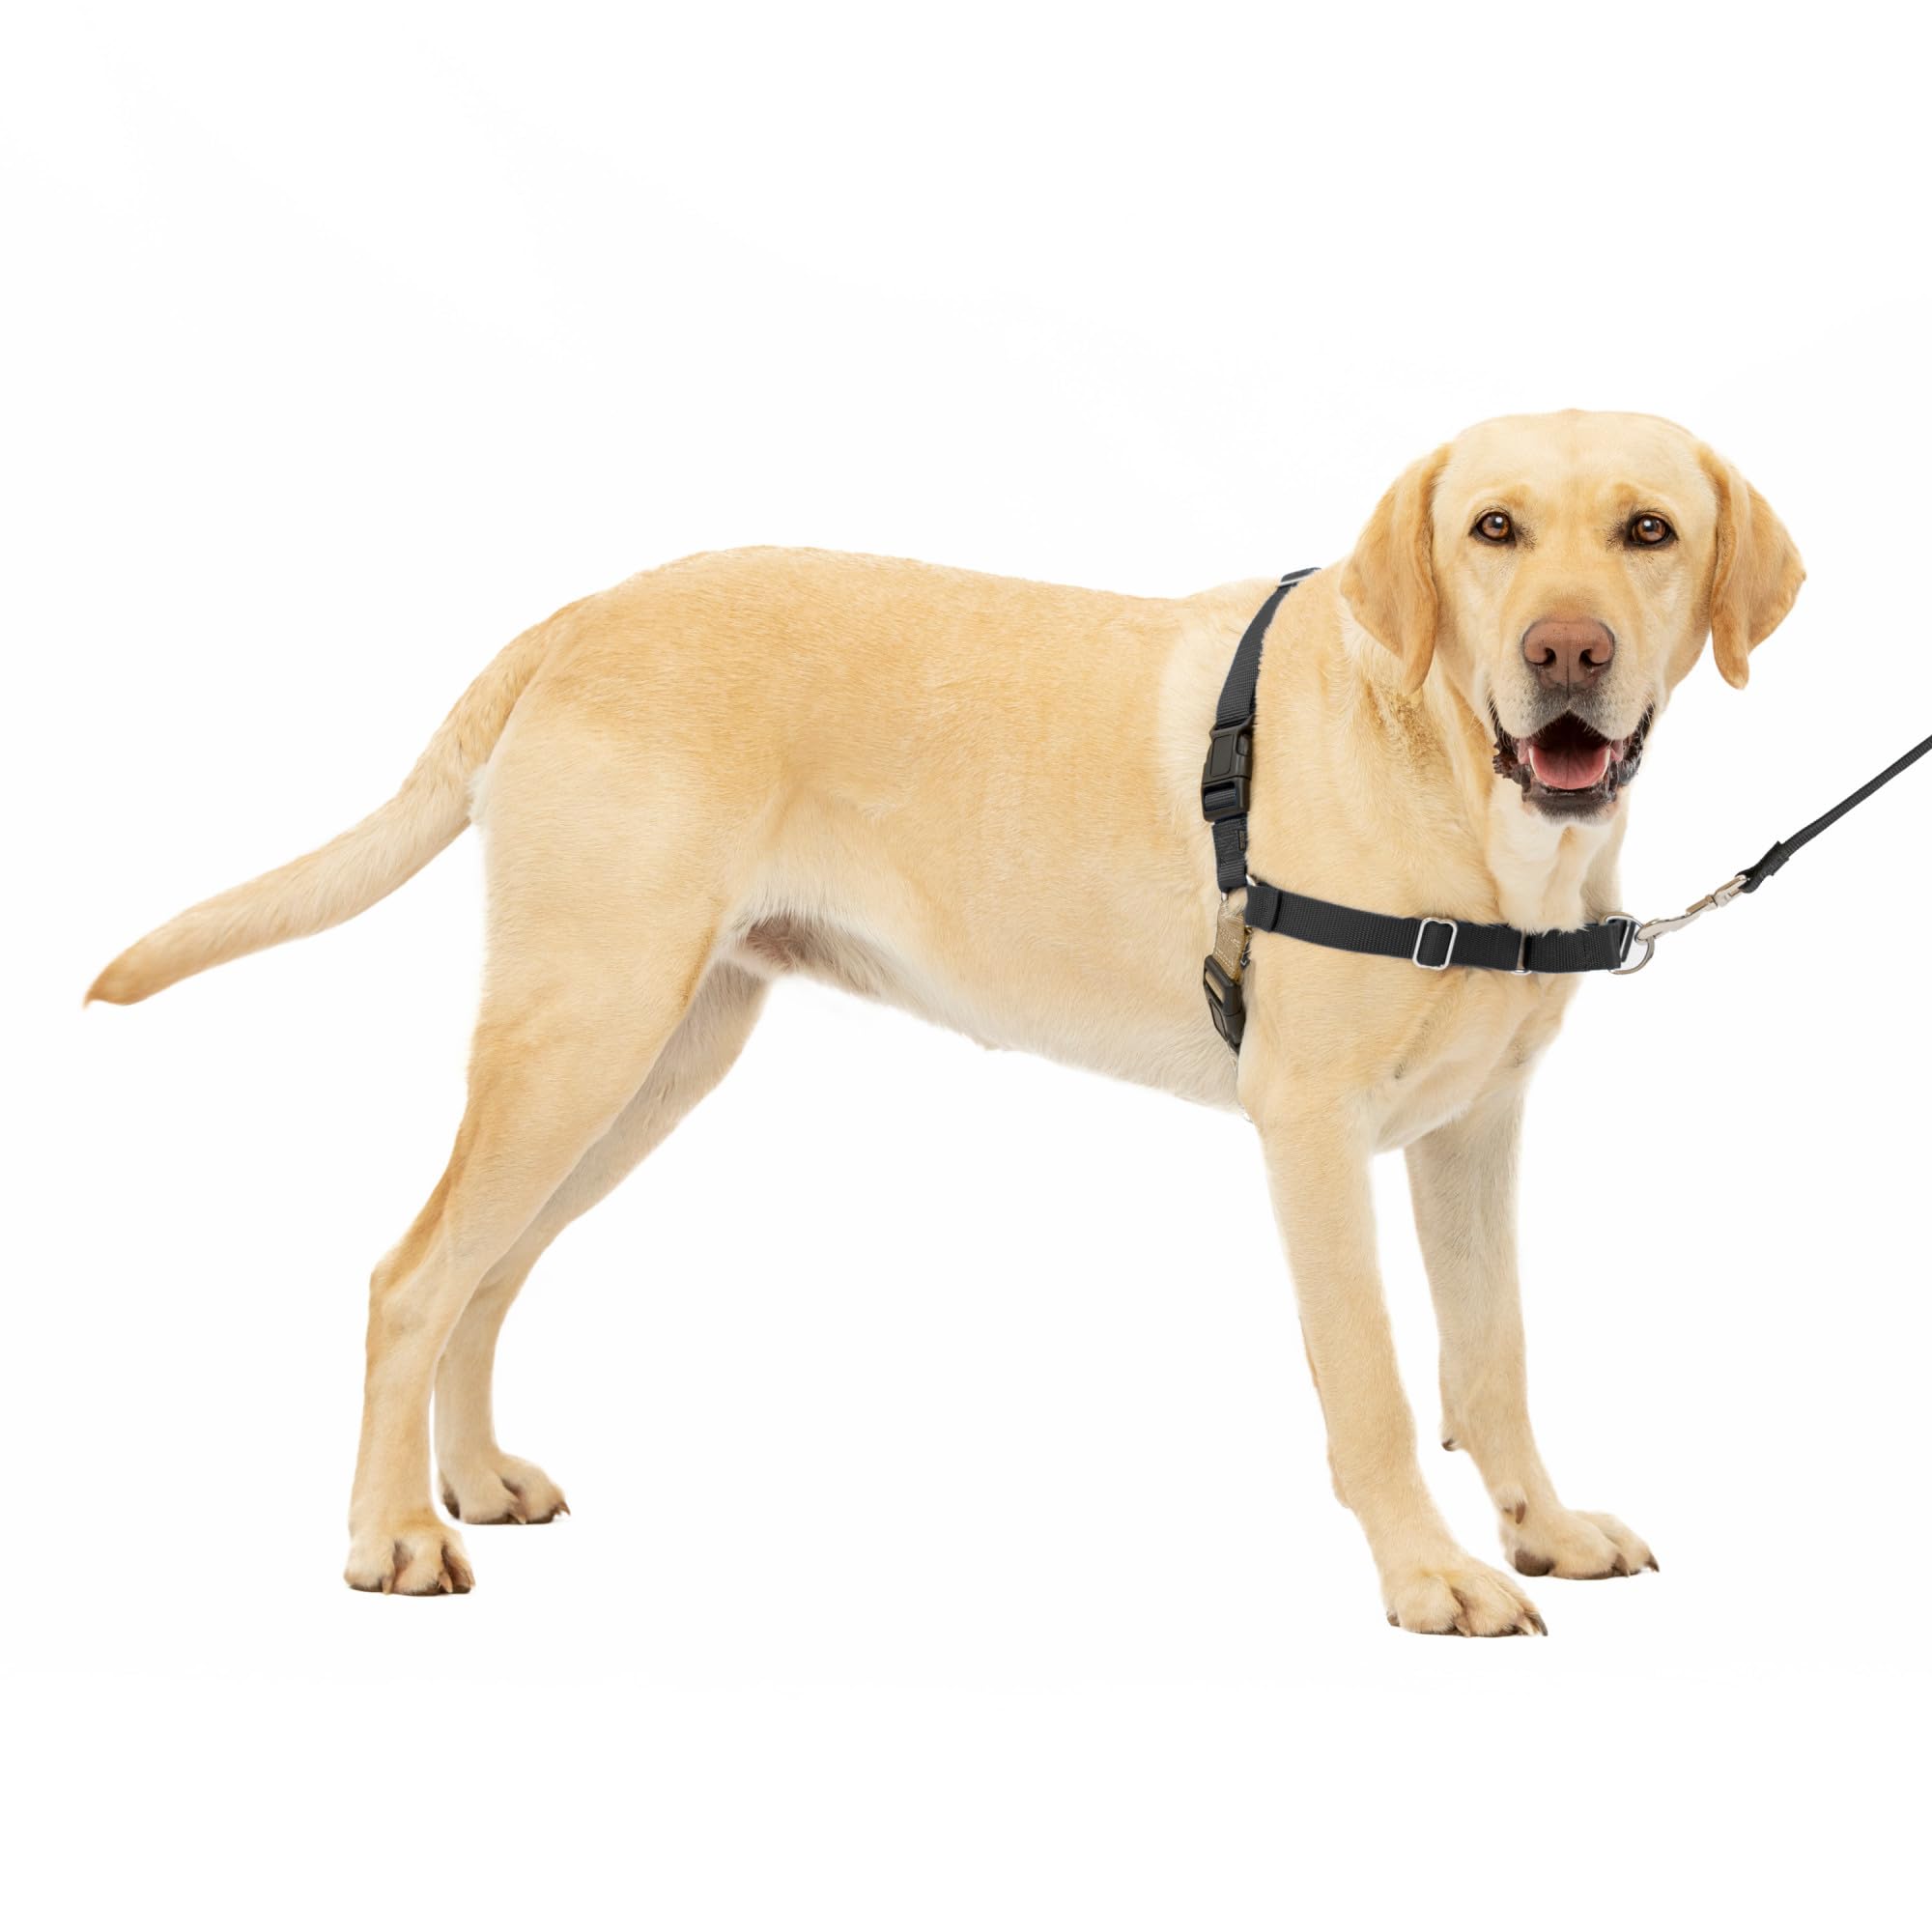 how to get a dog to stop pulling on leash